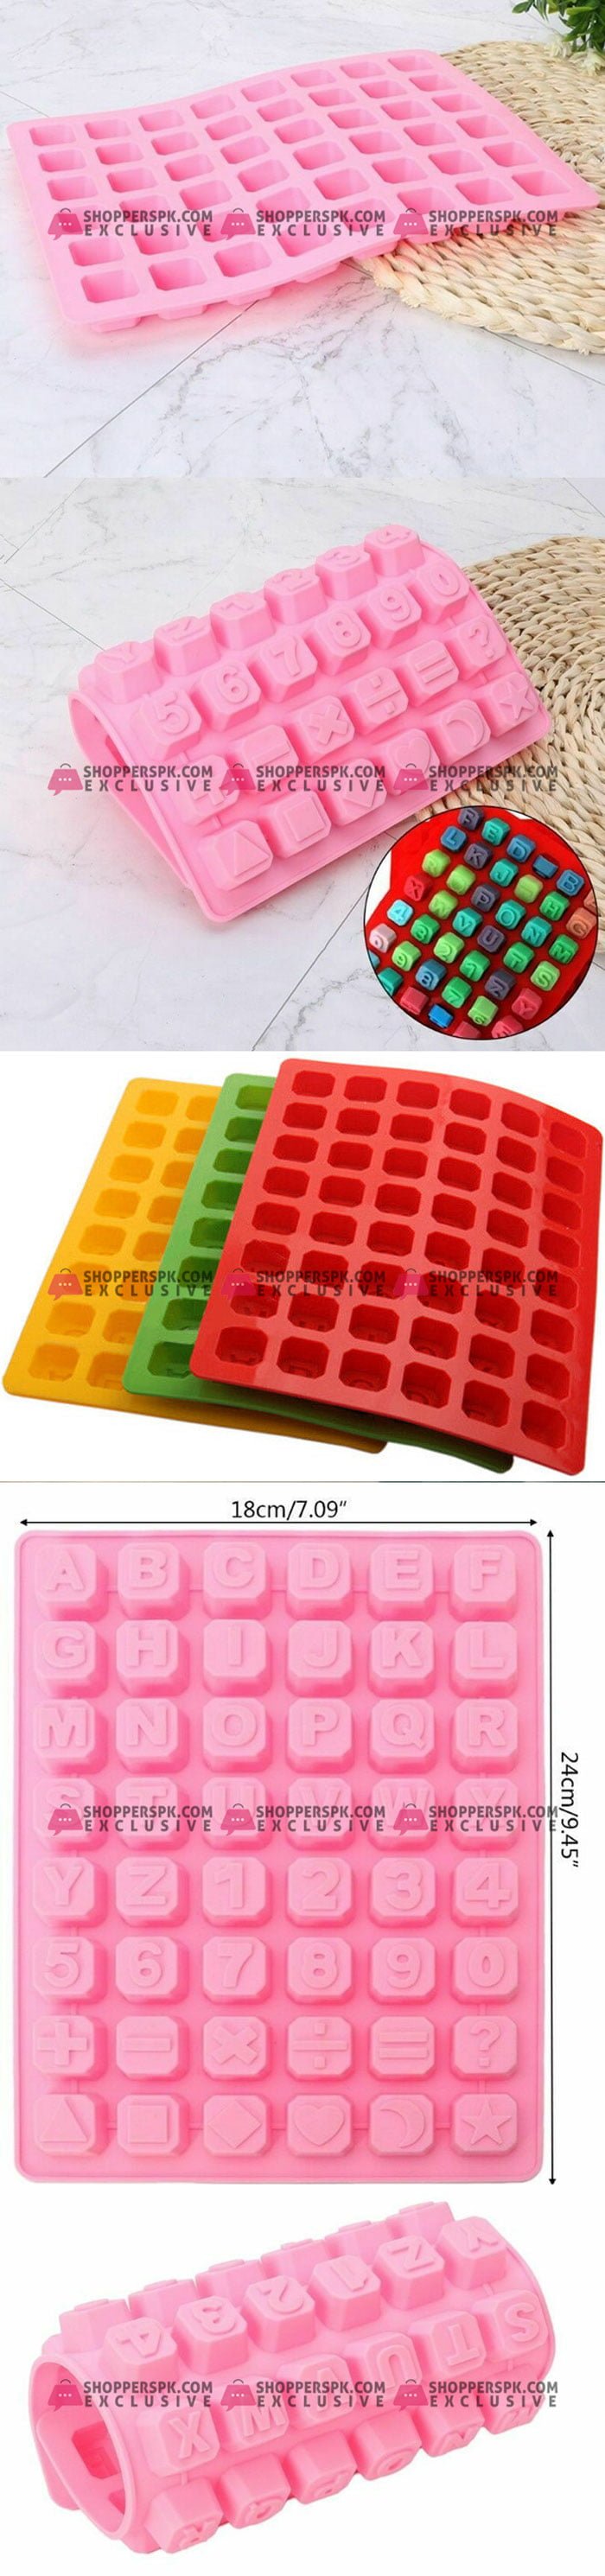 48 Alphabet Letter Number Silicone Mold Ice Cube Tray Chocolate Cake Candy Mould